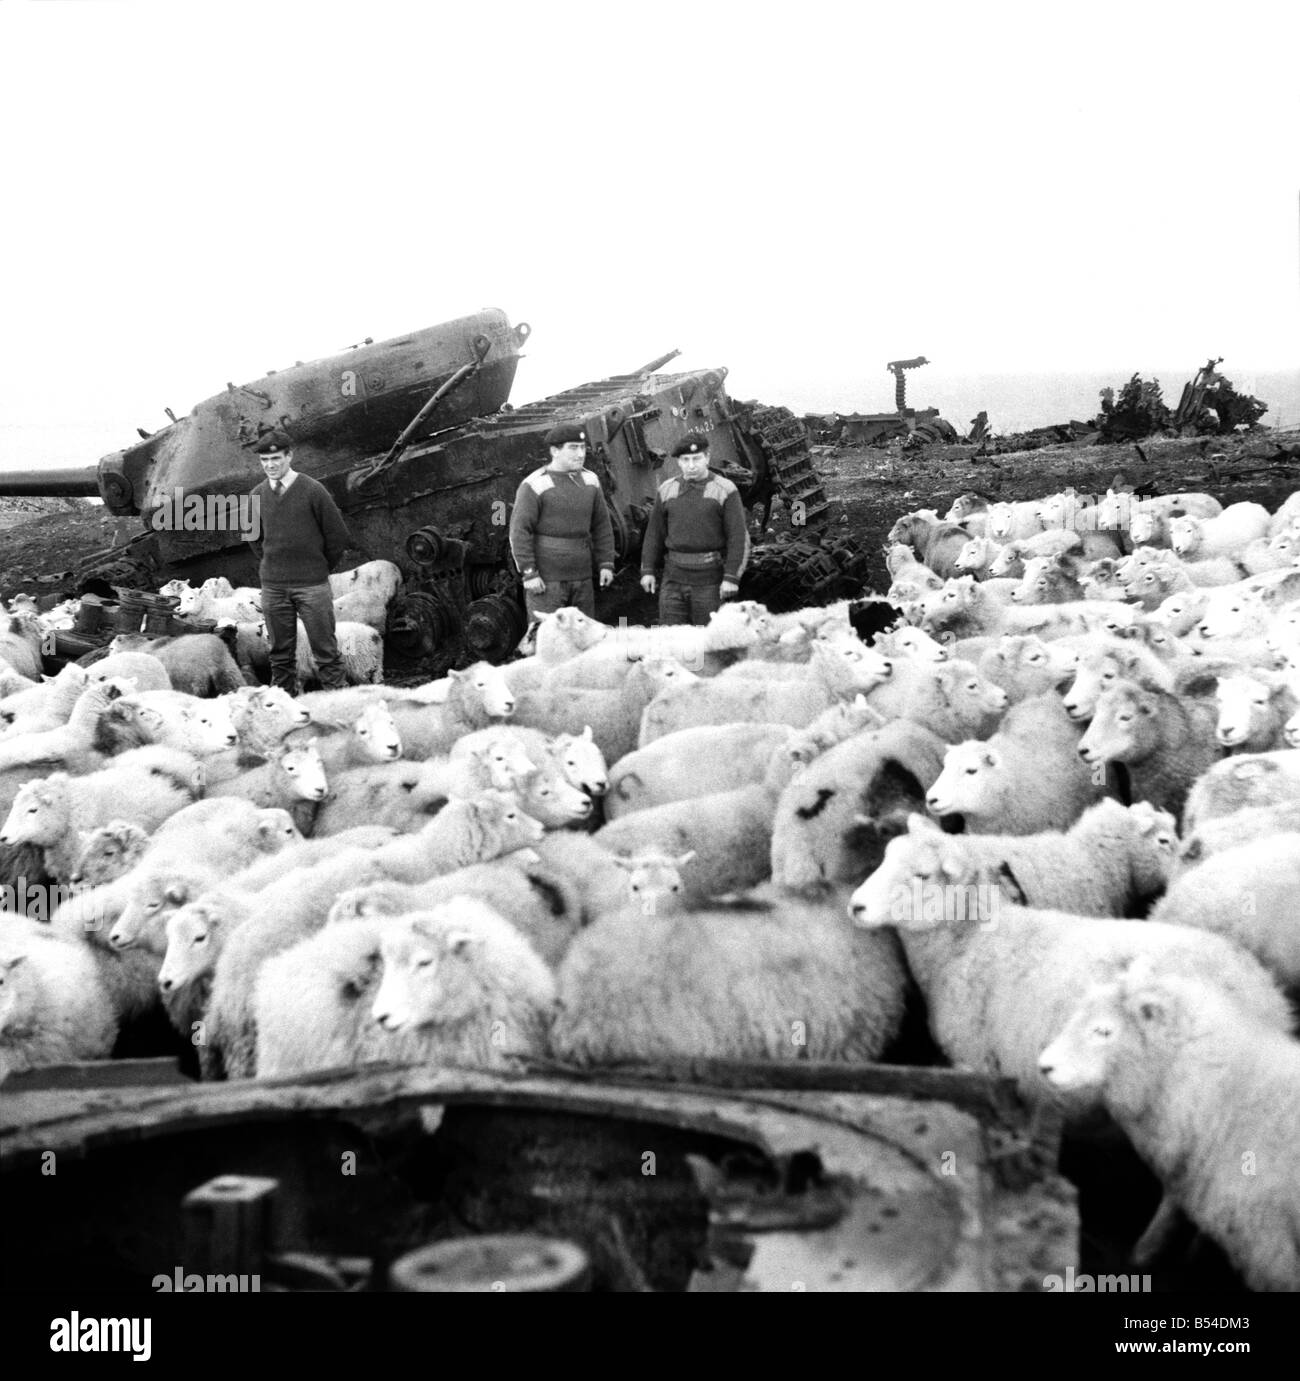 The Army threw open its 6,000 acre, tank range at Castle Martin, Pembs., for the North Pembrokeshire hillside farmers to graze their sheep. The sheep who came down from the cold' quickly sought the protection of the Conquerer target tank as a windshield and made 'shepherds' of Staff Sgt. Alan Healy, Trooper Bob Bartlett, and L/Cpl Lawrence Carter members of the 1st The Queens Dragoon Guards, R.A.C. who were making an inspection of the target tanks on the Castle Martin range. December 1969 Z11477-002 Stock Photo